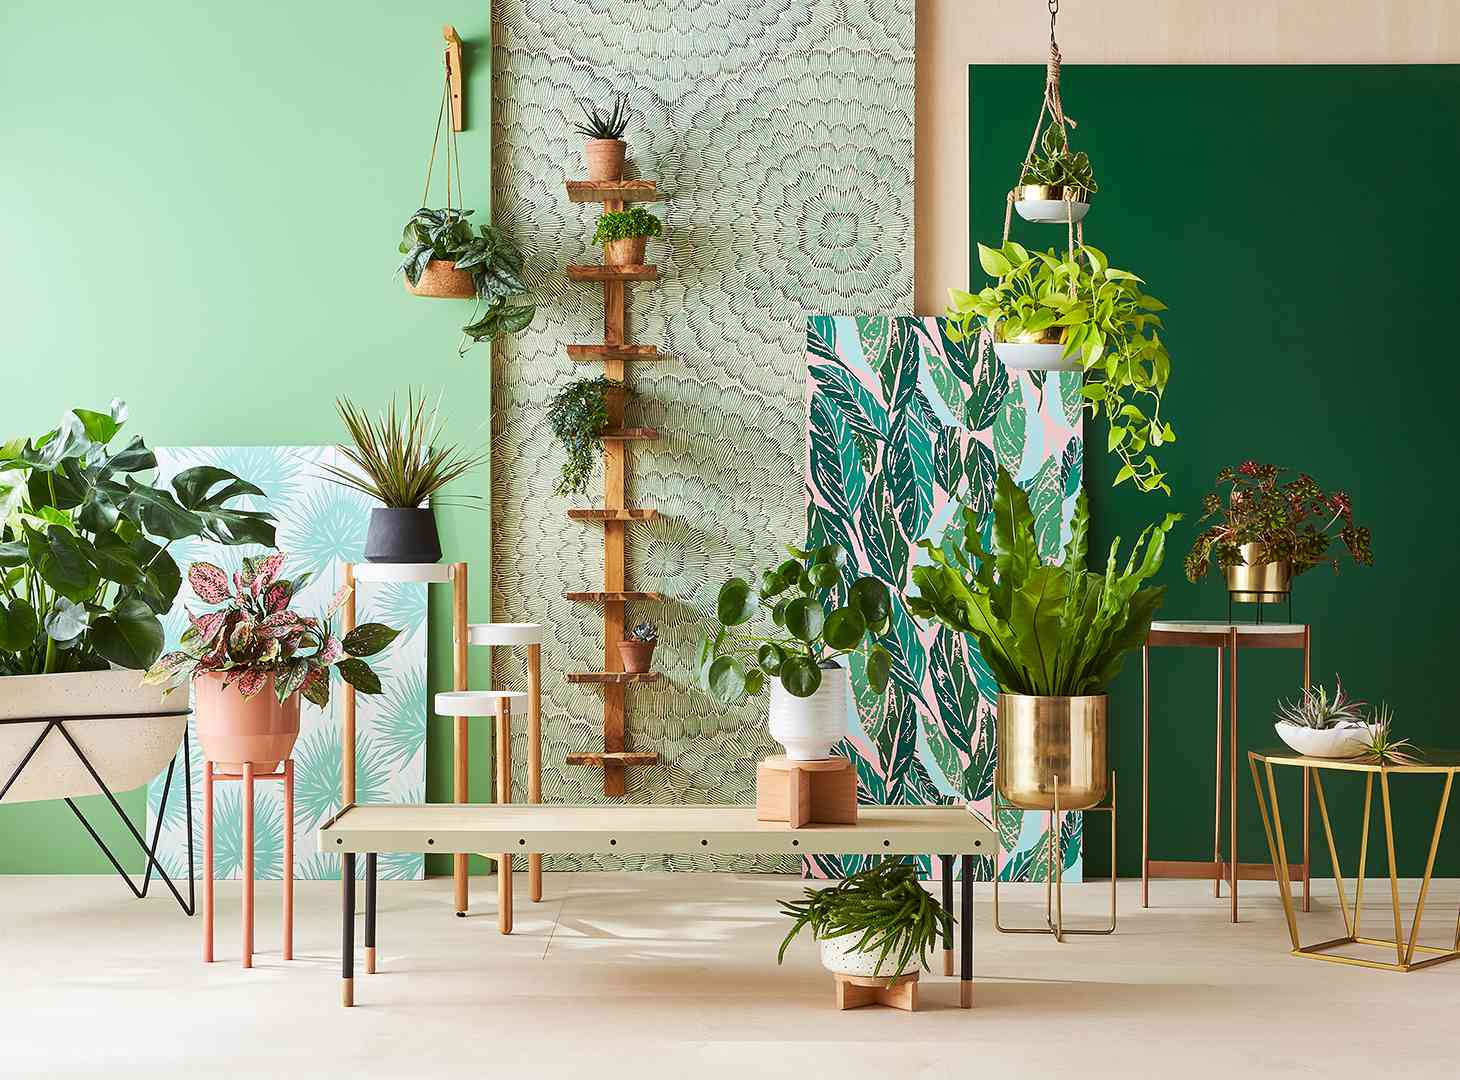 decorative plant stands display green